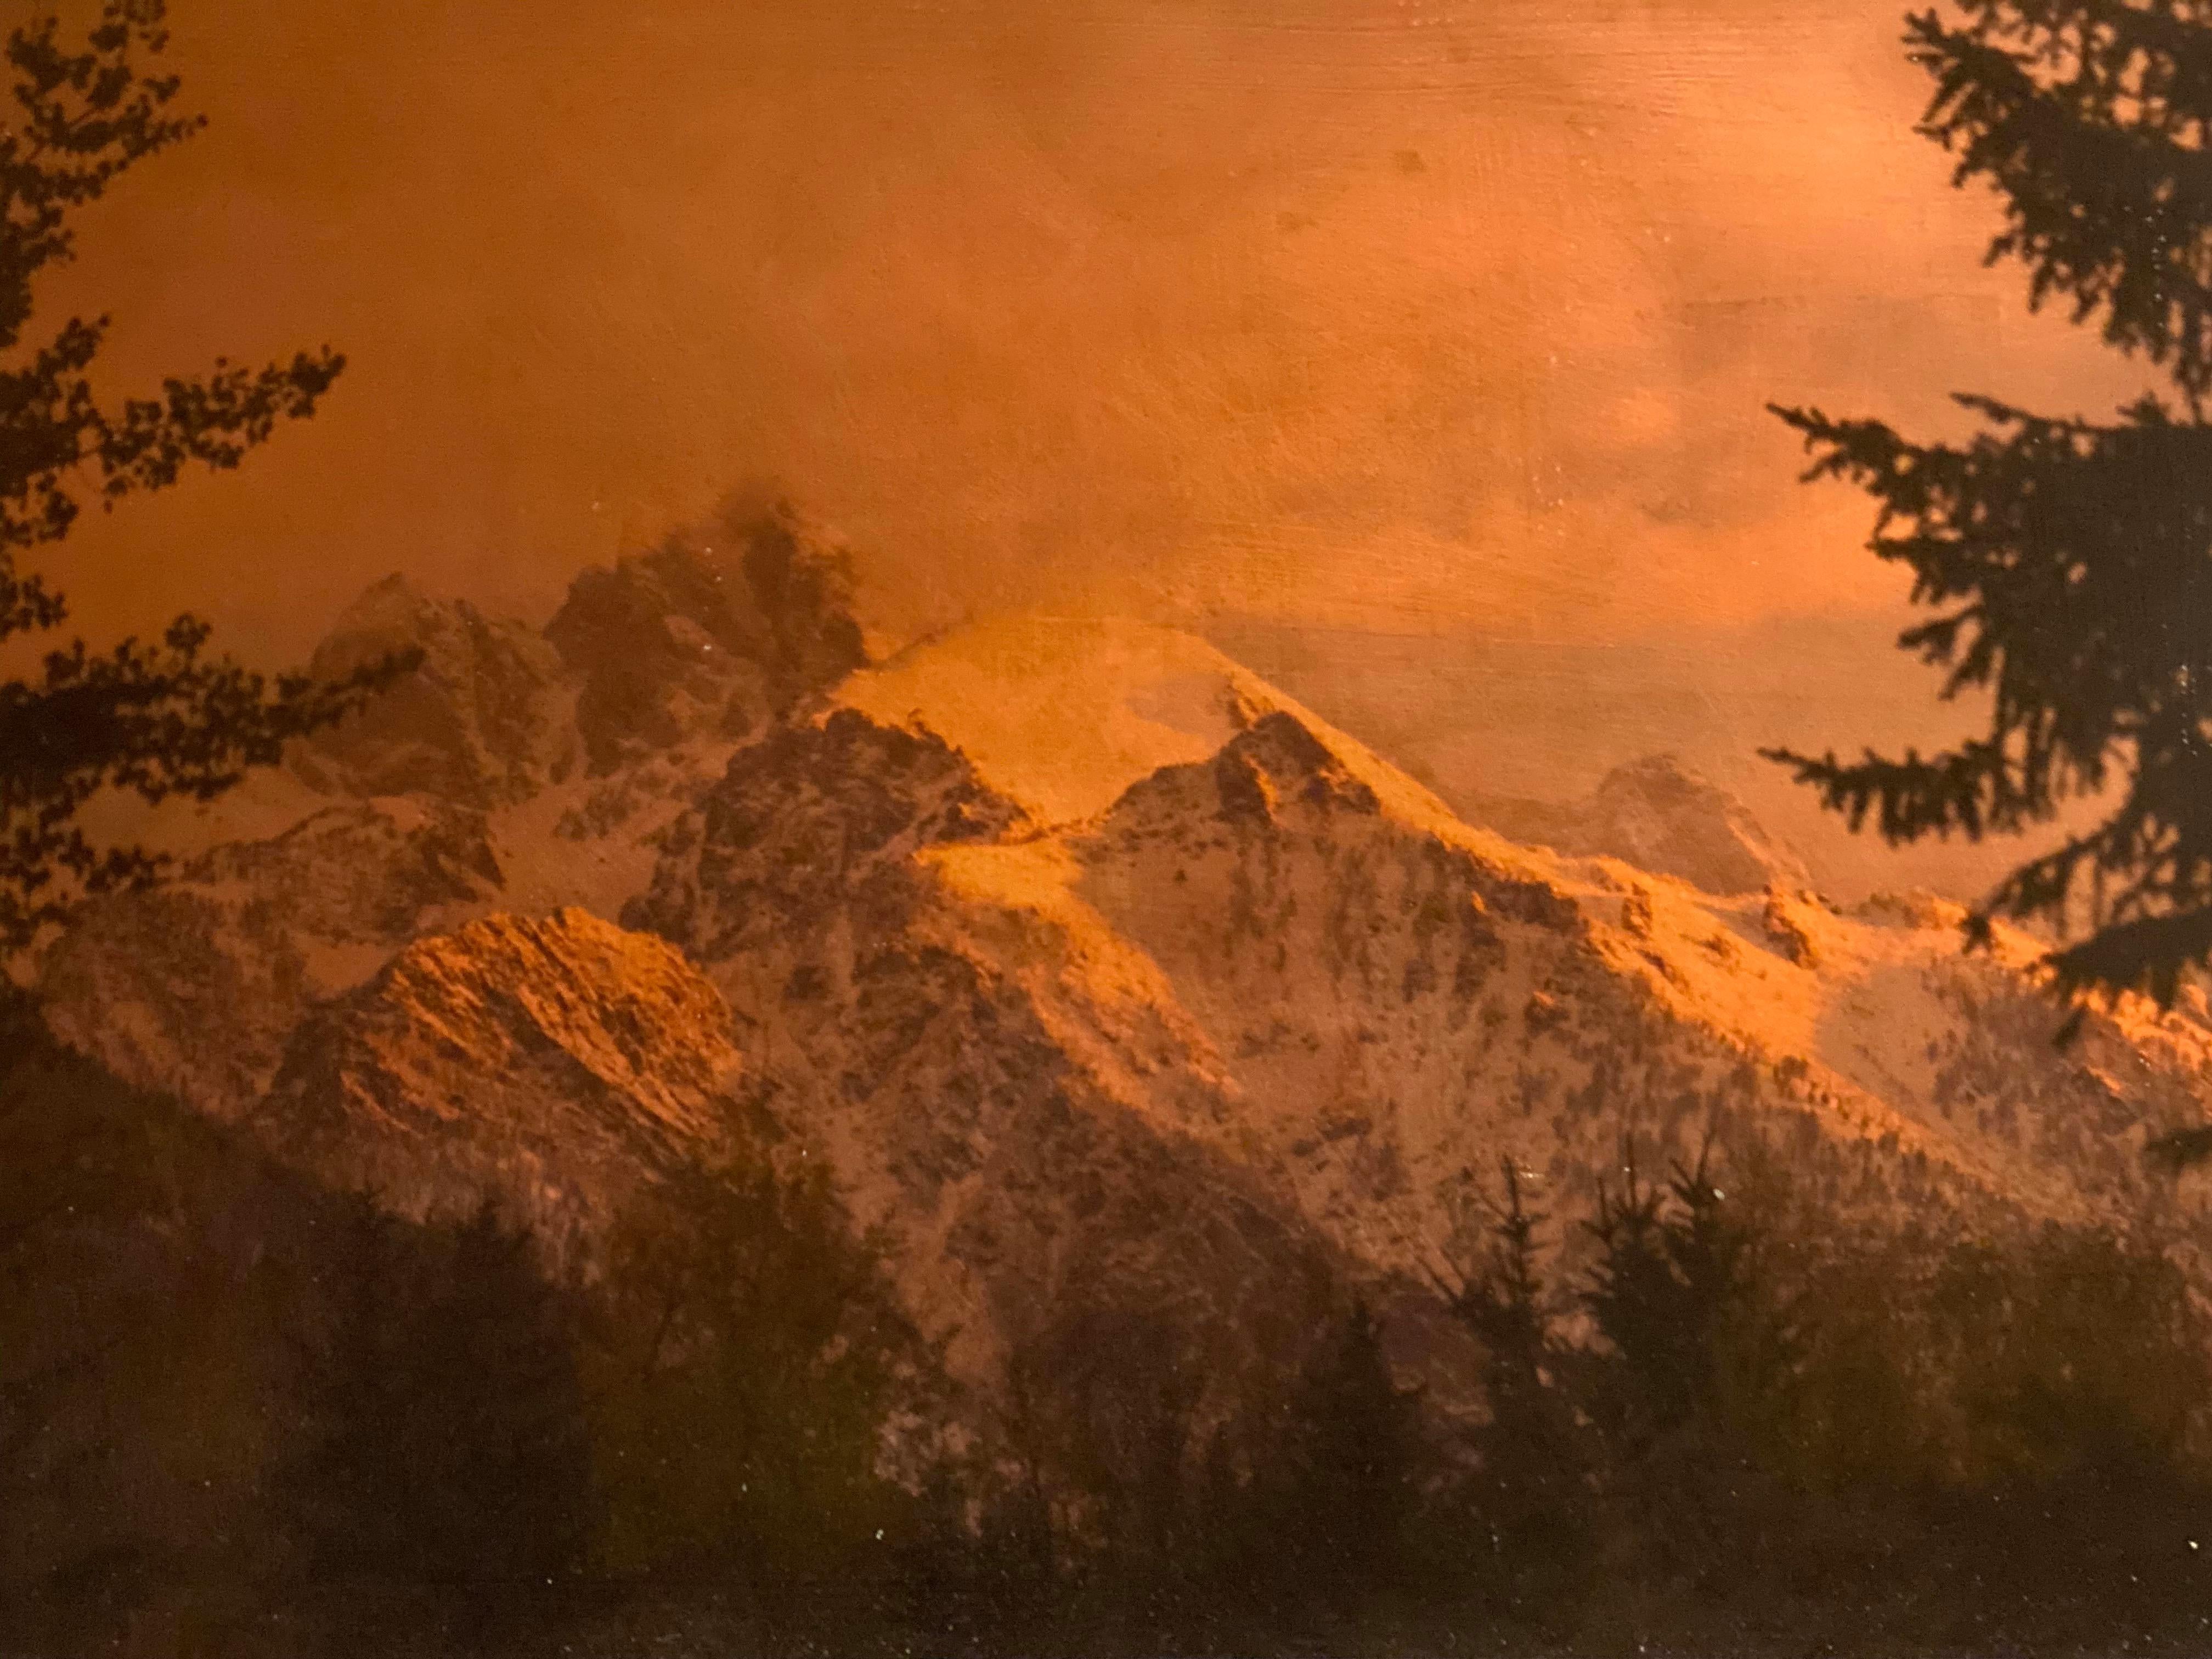 A horizontal photographic print on copper leaf and paper depicting a towering mountain peak by Anne Muller. Muller combines her photography skills with her experience in painting and textiles as she renders this stunning landscape image in the